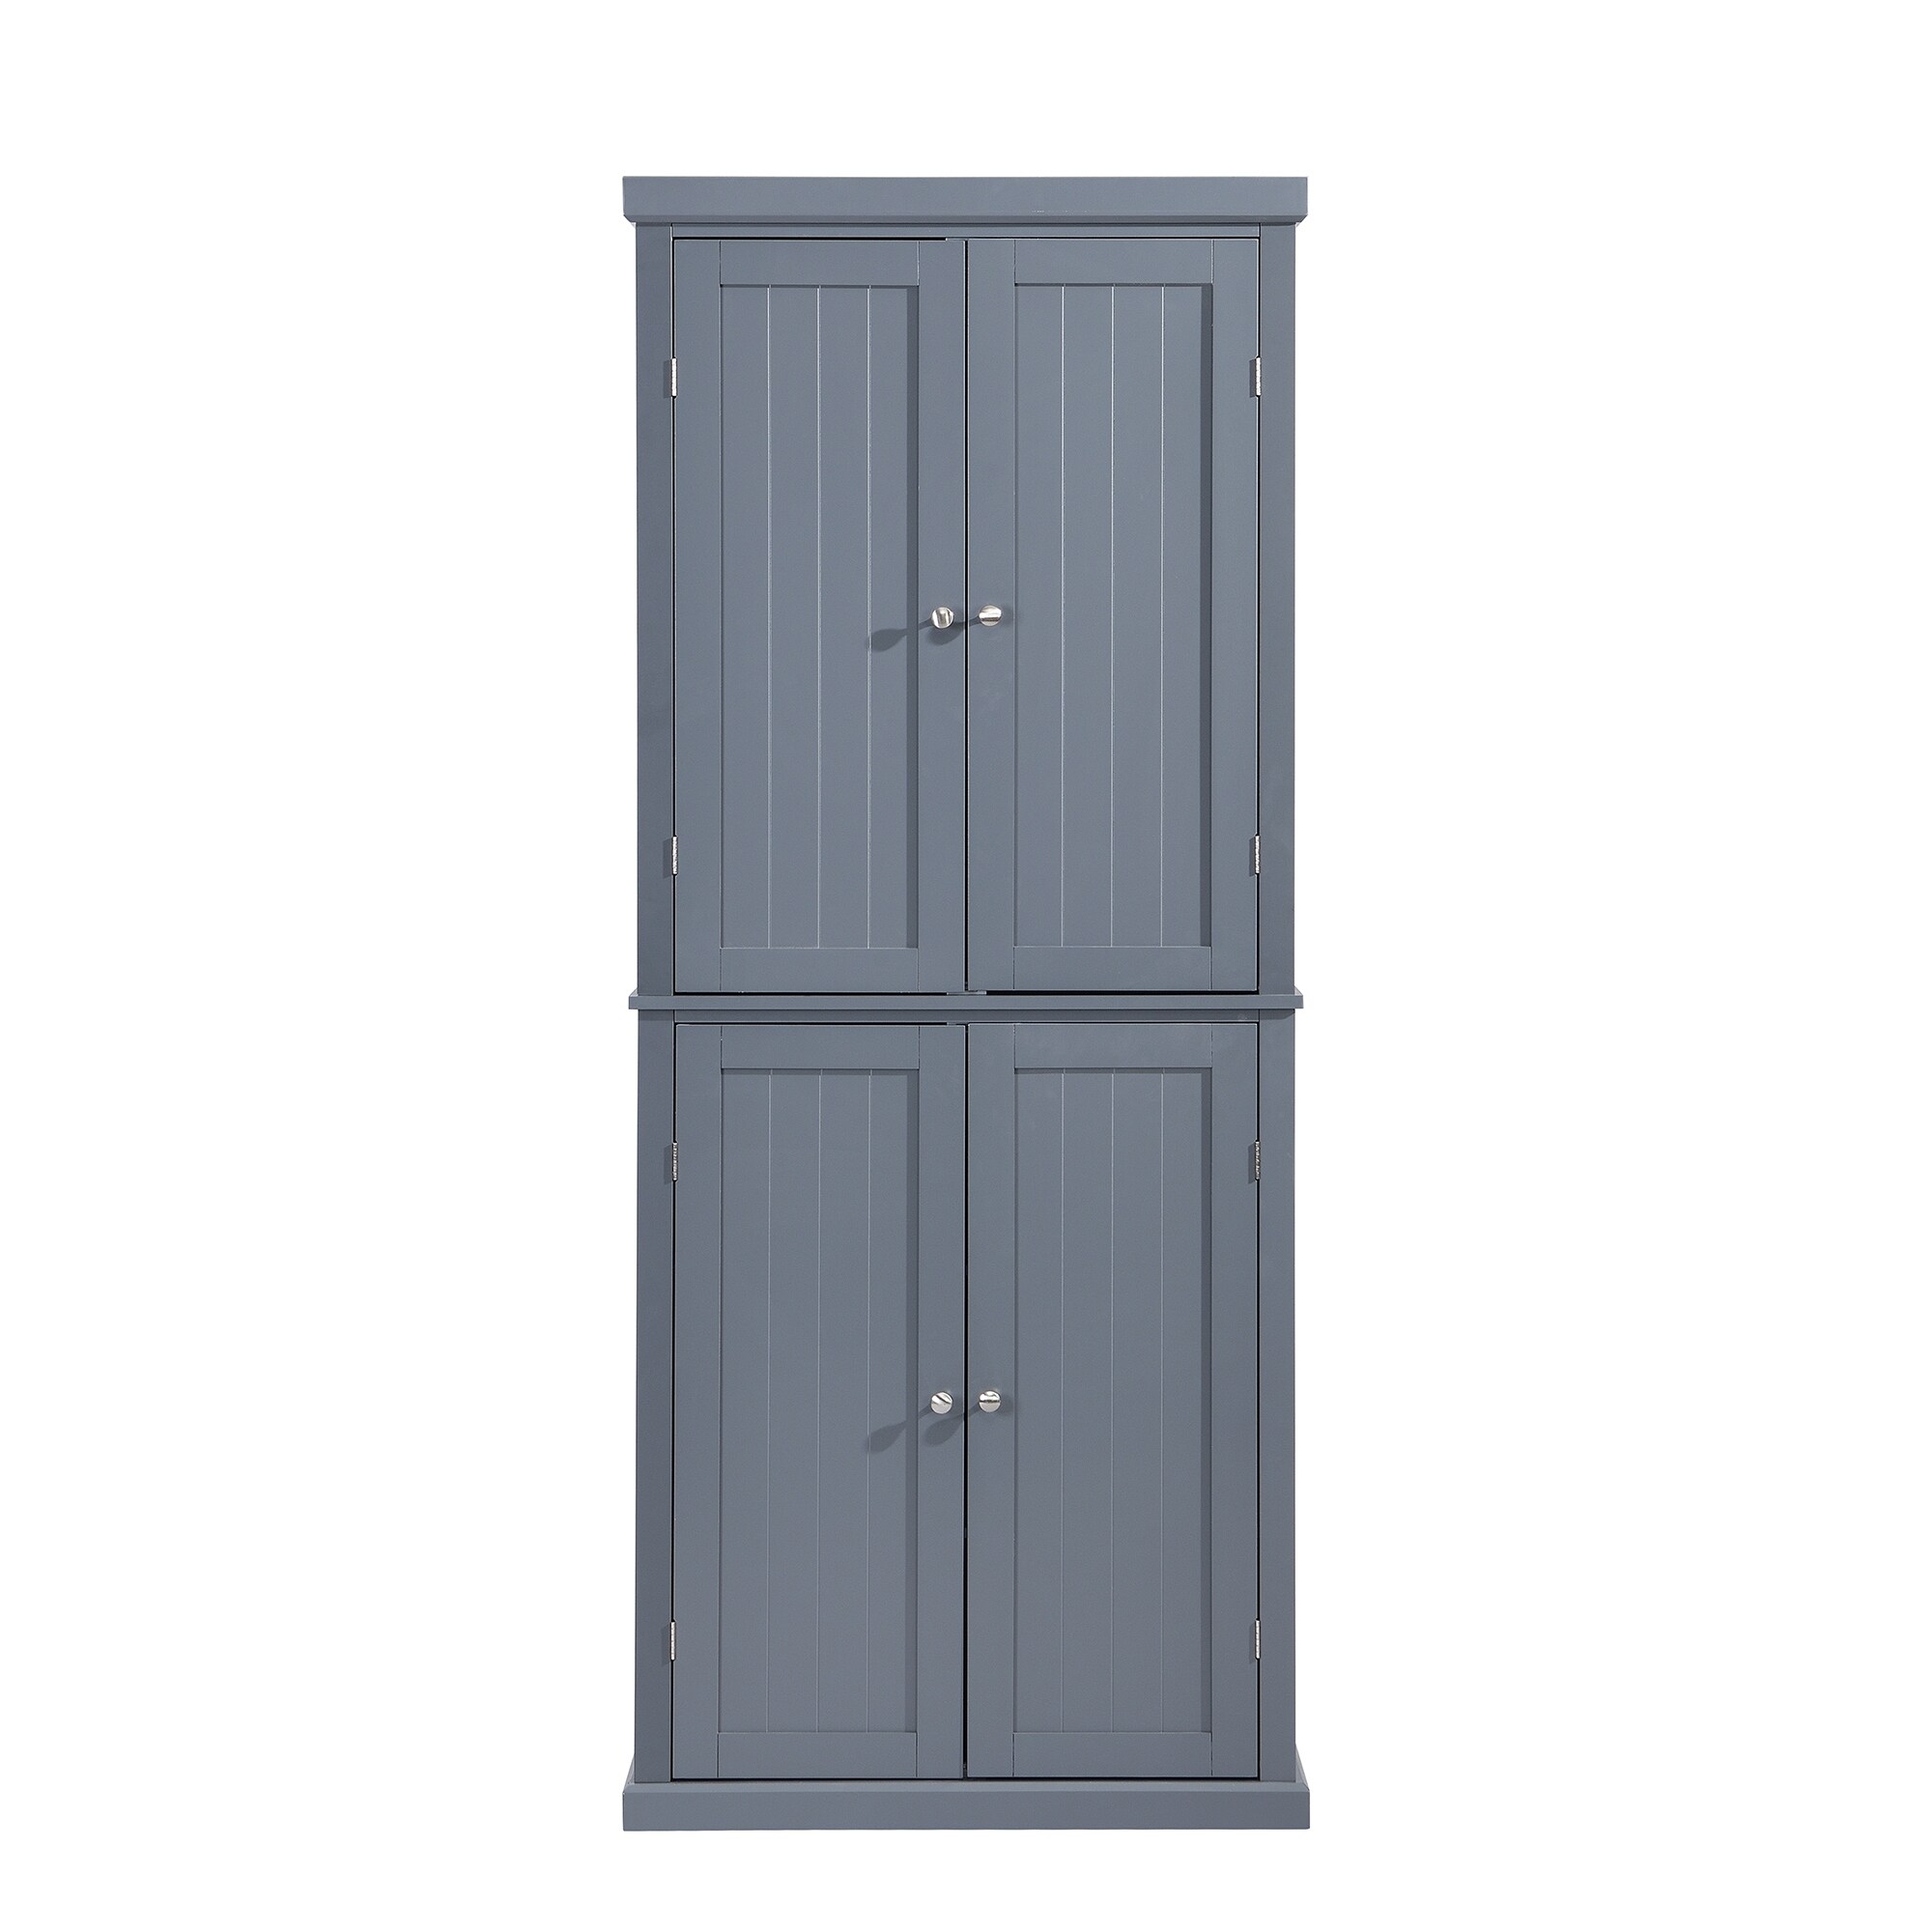 https://ak1.ostkcdn.com/images/products/is/images/direct/c402aa3931c67f9959f8e057d794c129e443642d/Freestanding-Tall-Kitchen-Pantry%2C-72.4%22-Minimalist-Kitchen-Storage-Cabinet-Organizer-with-4-Doors-and-Adjustable-Shelves%2C-White.jpg